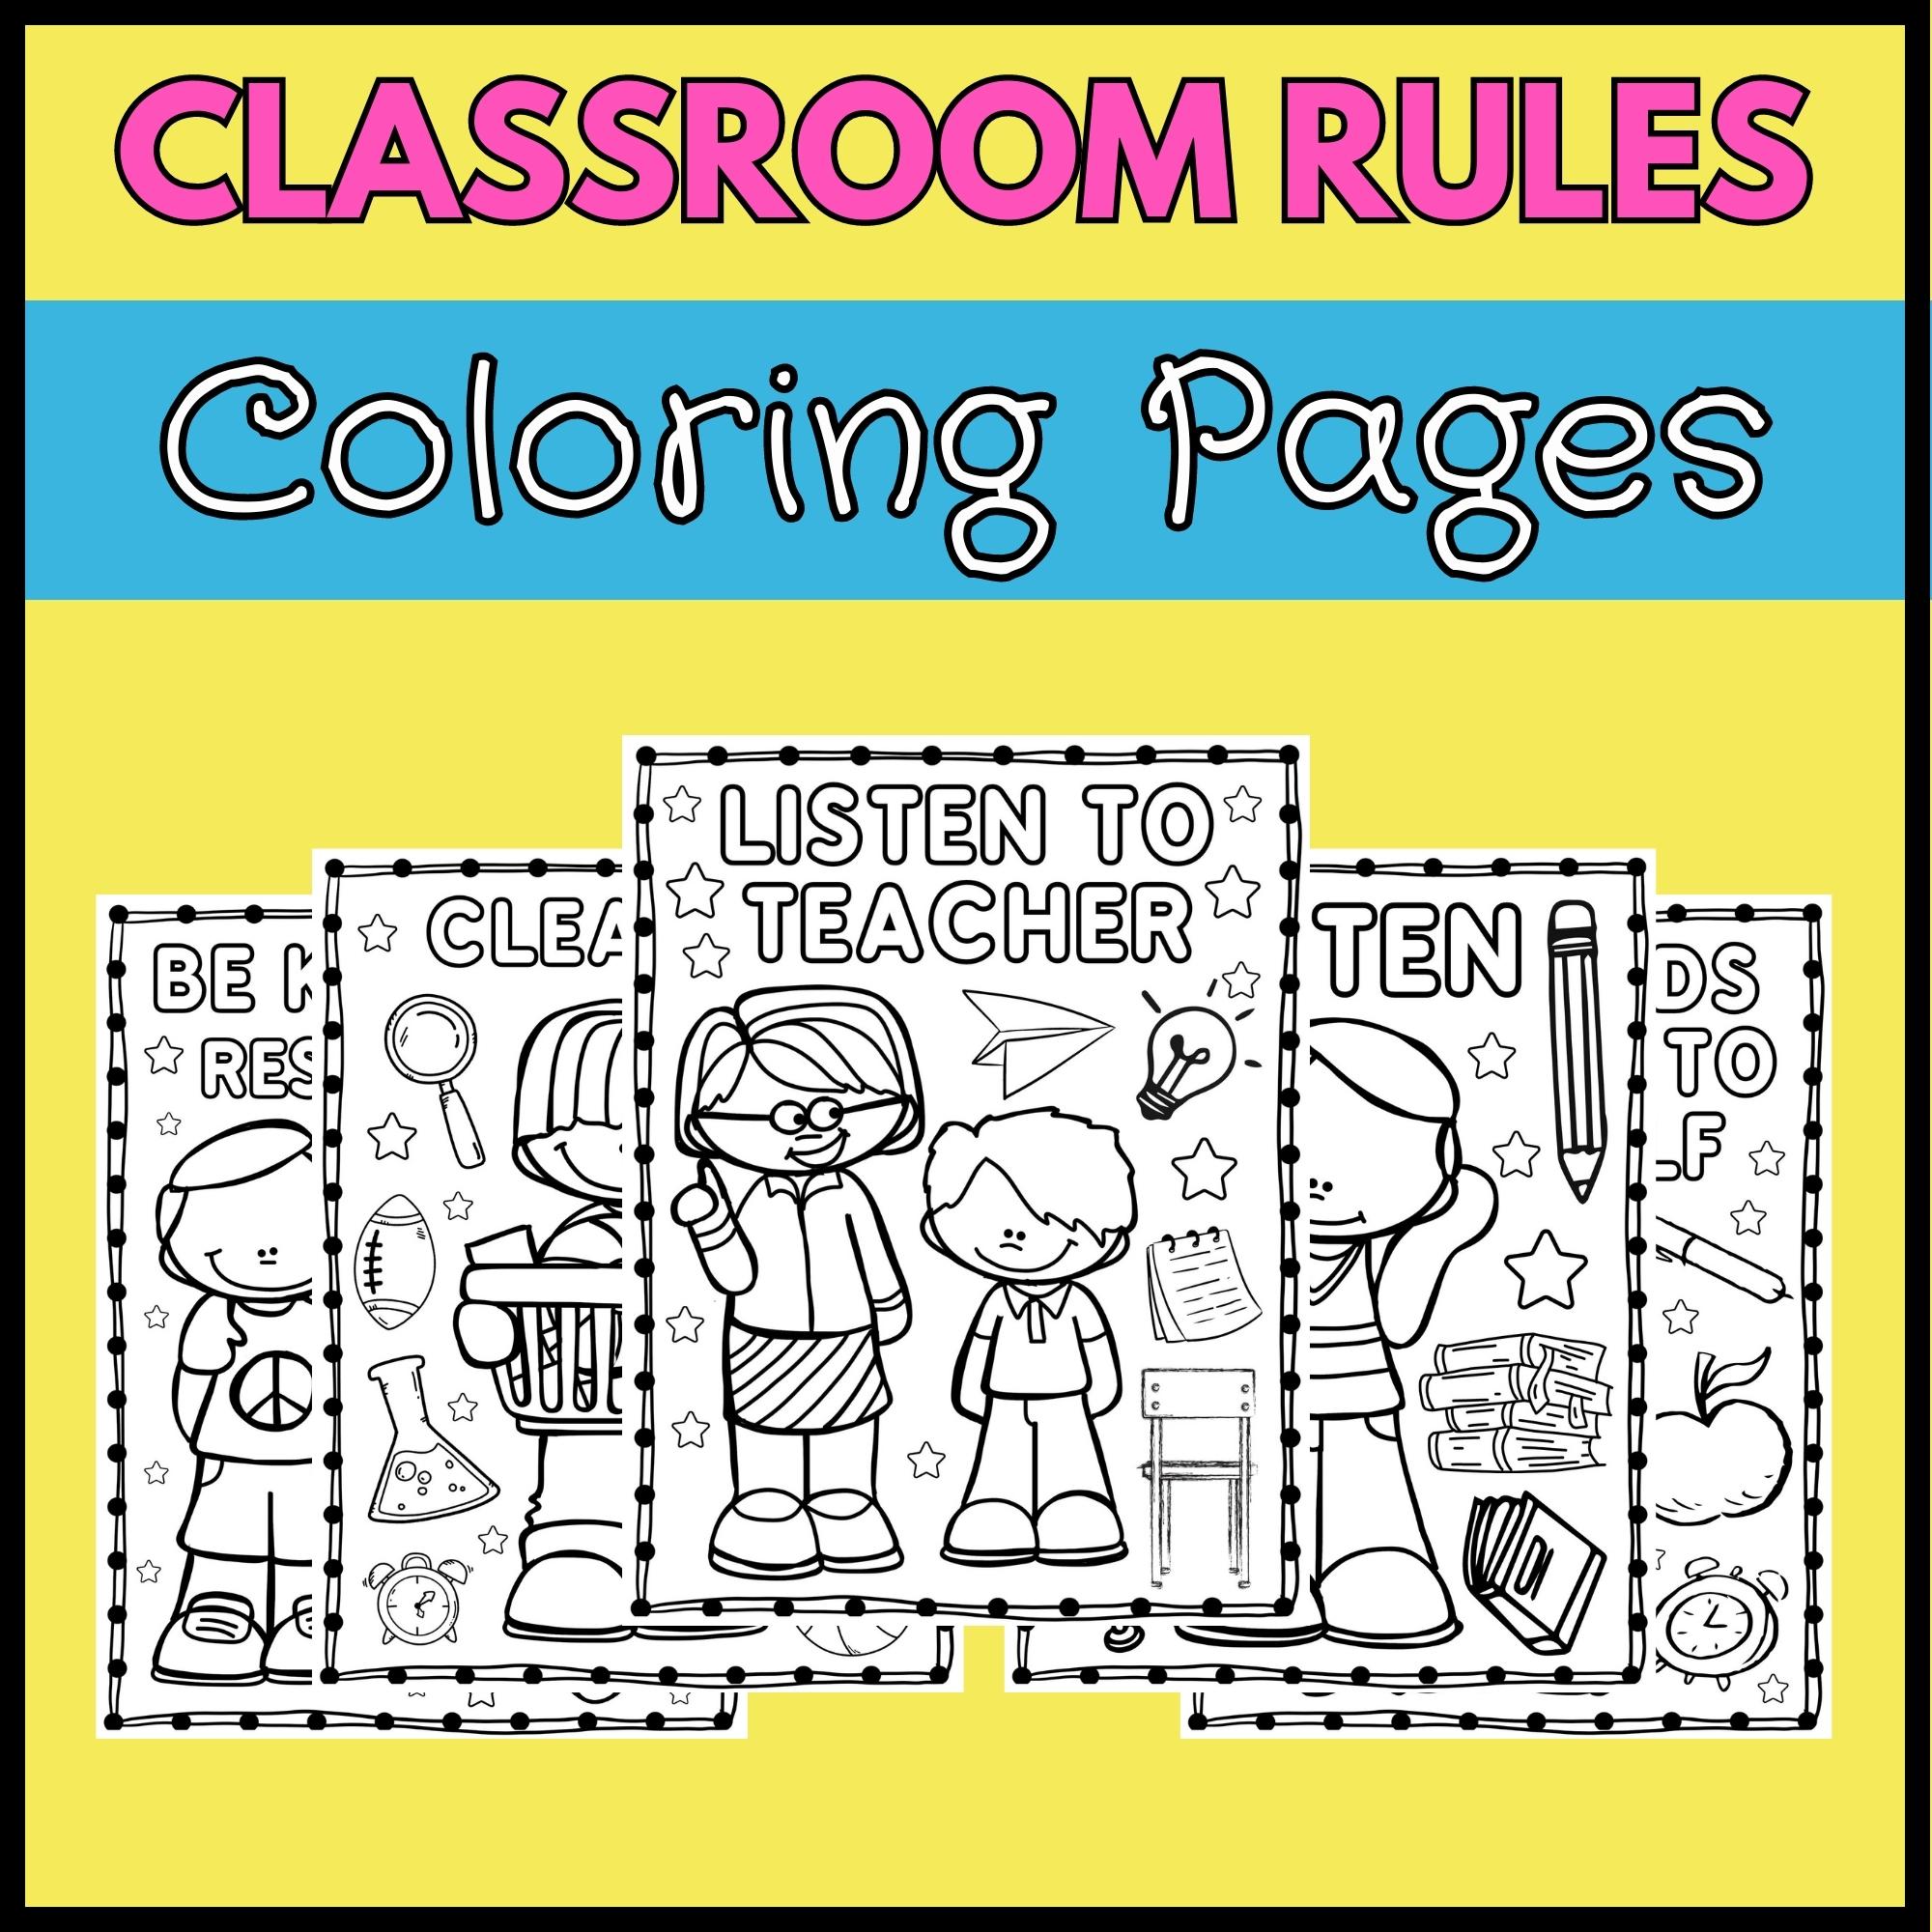 Classroom rules coloring pages